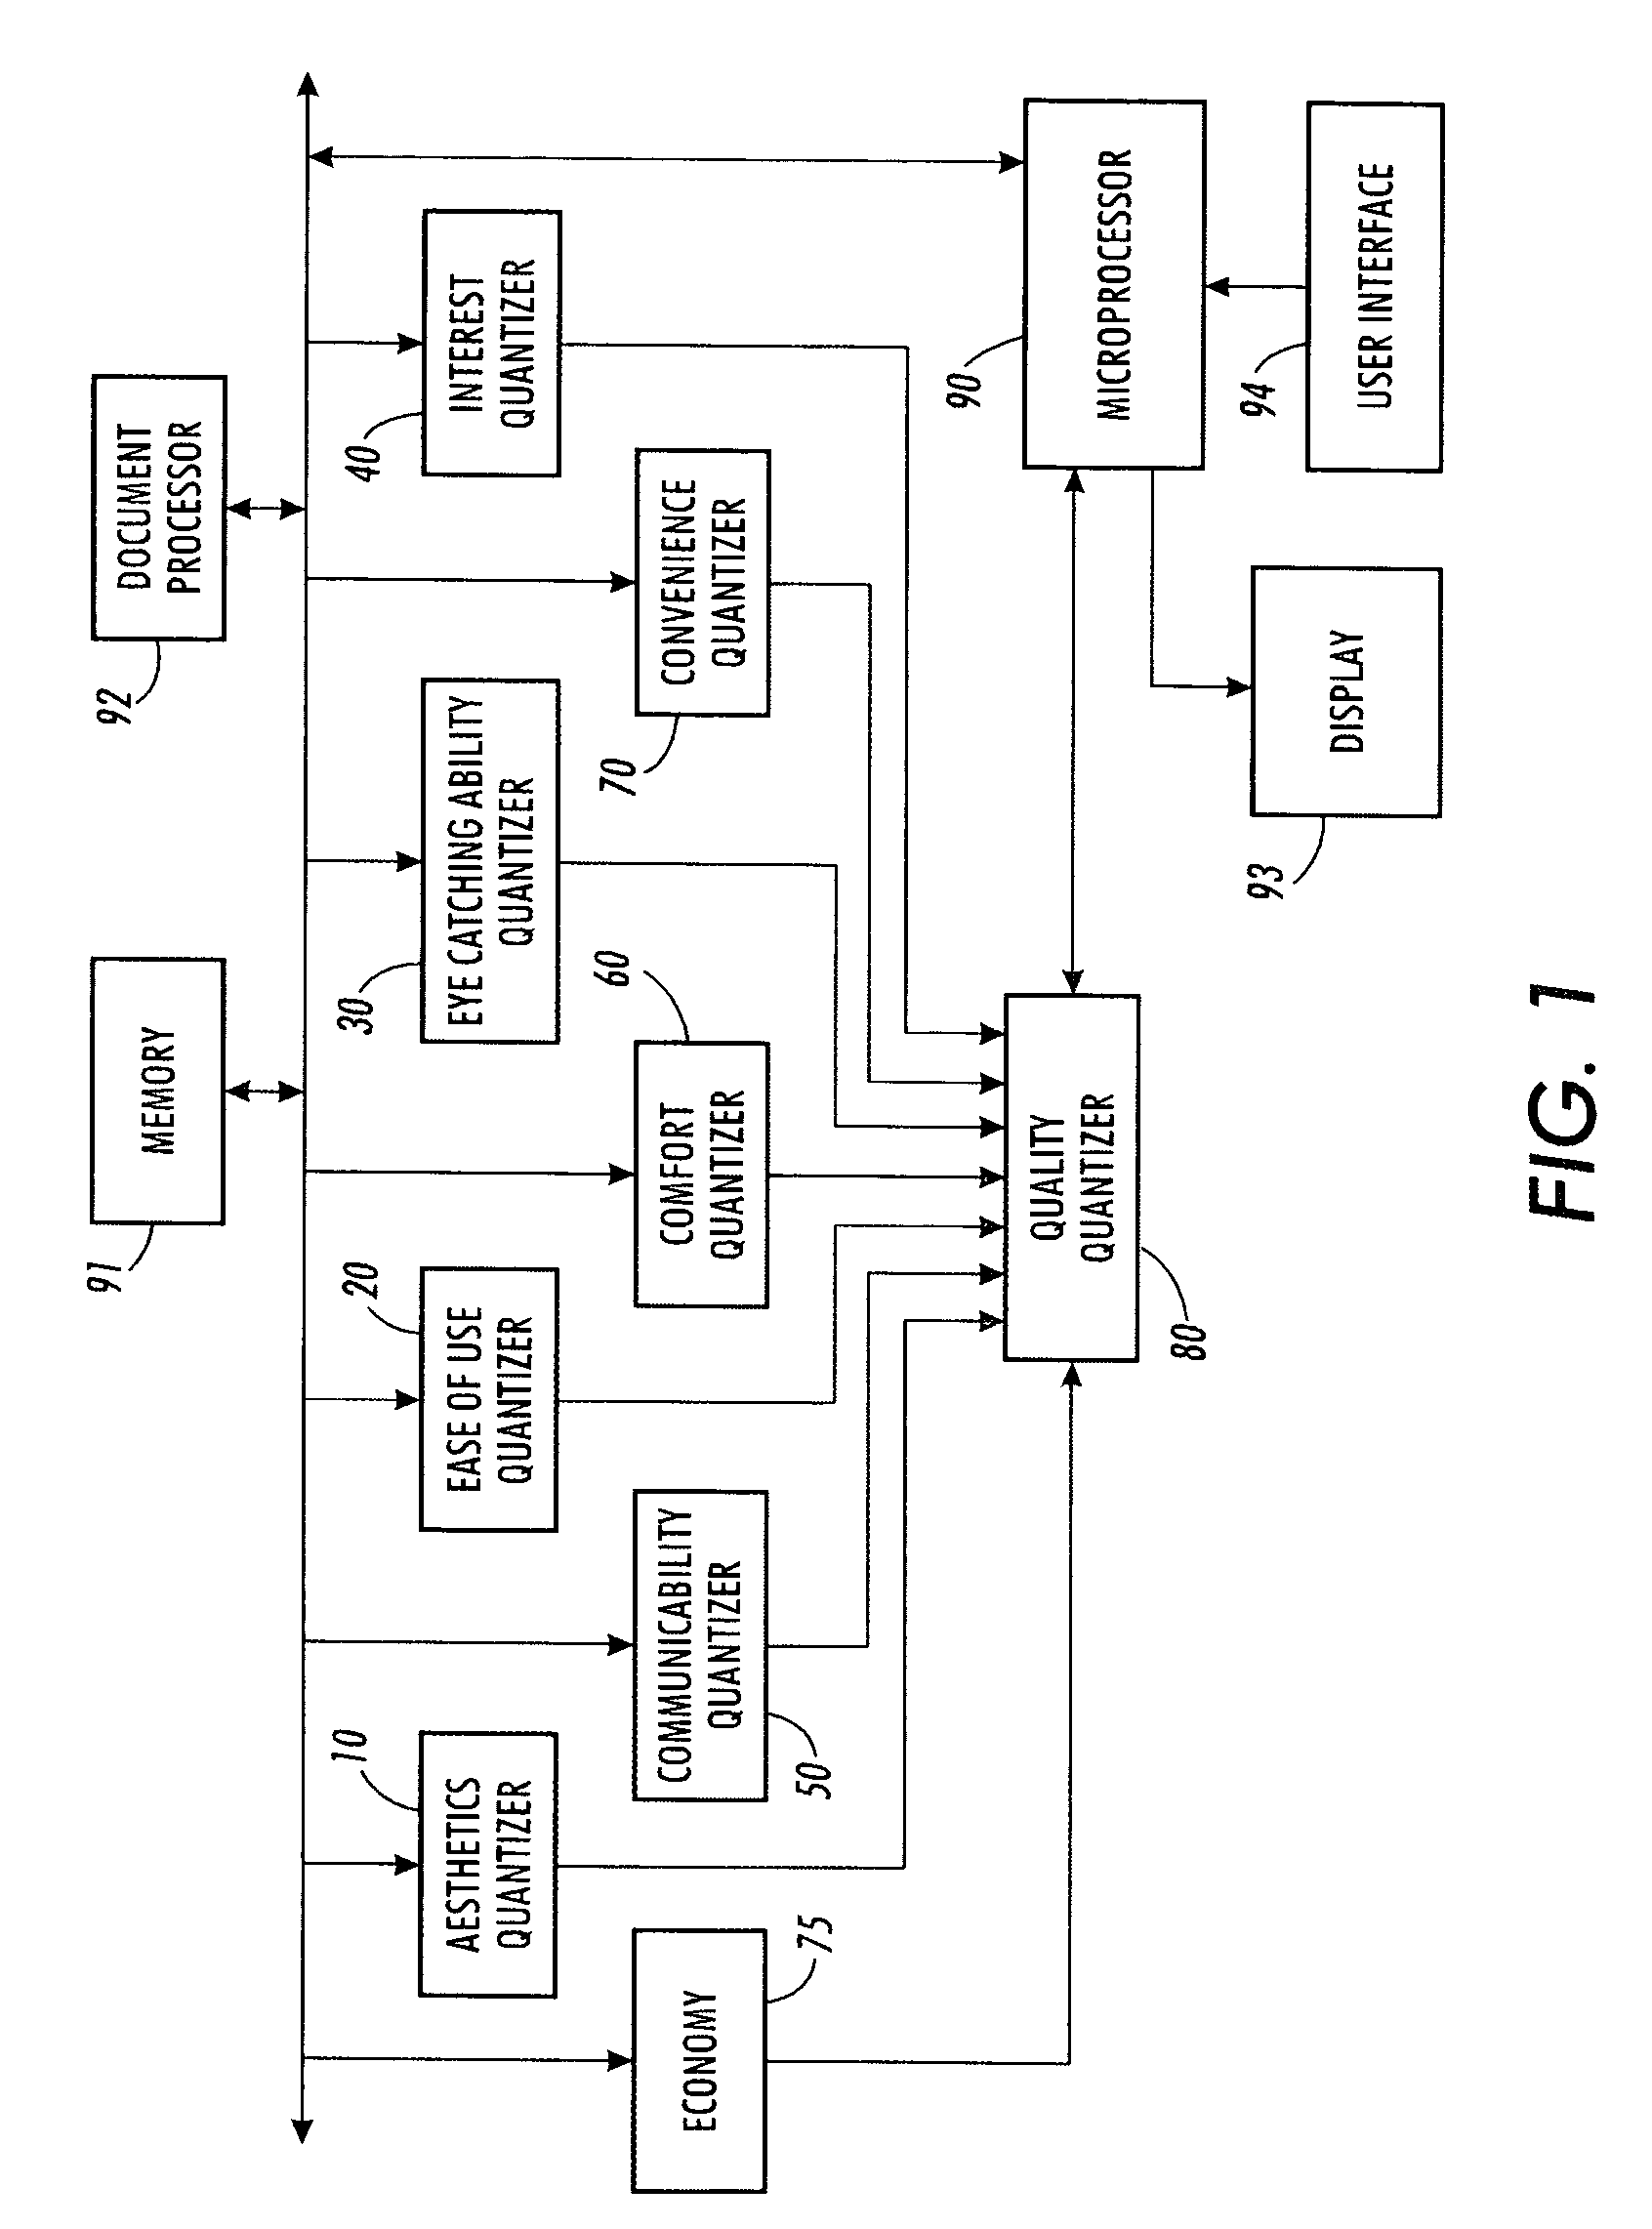 Multi-versioned documents and method for creation and use thereof